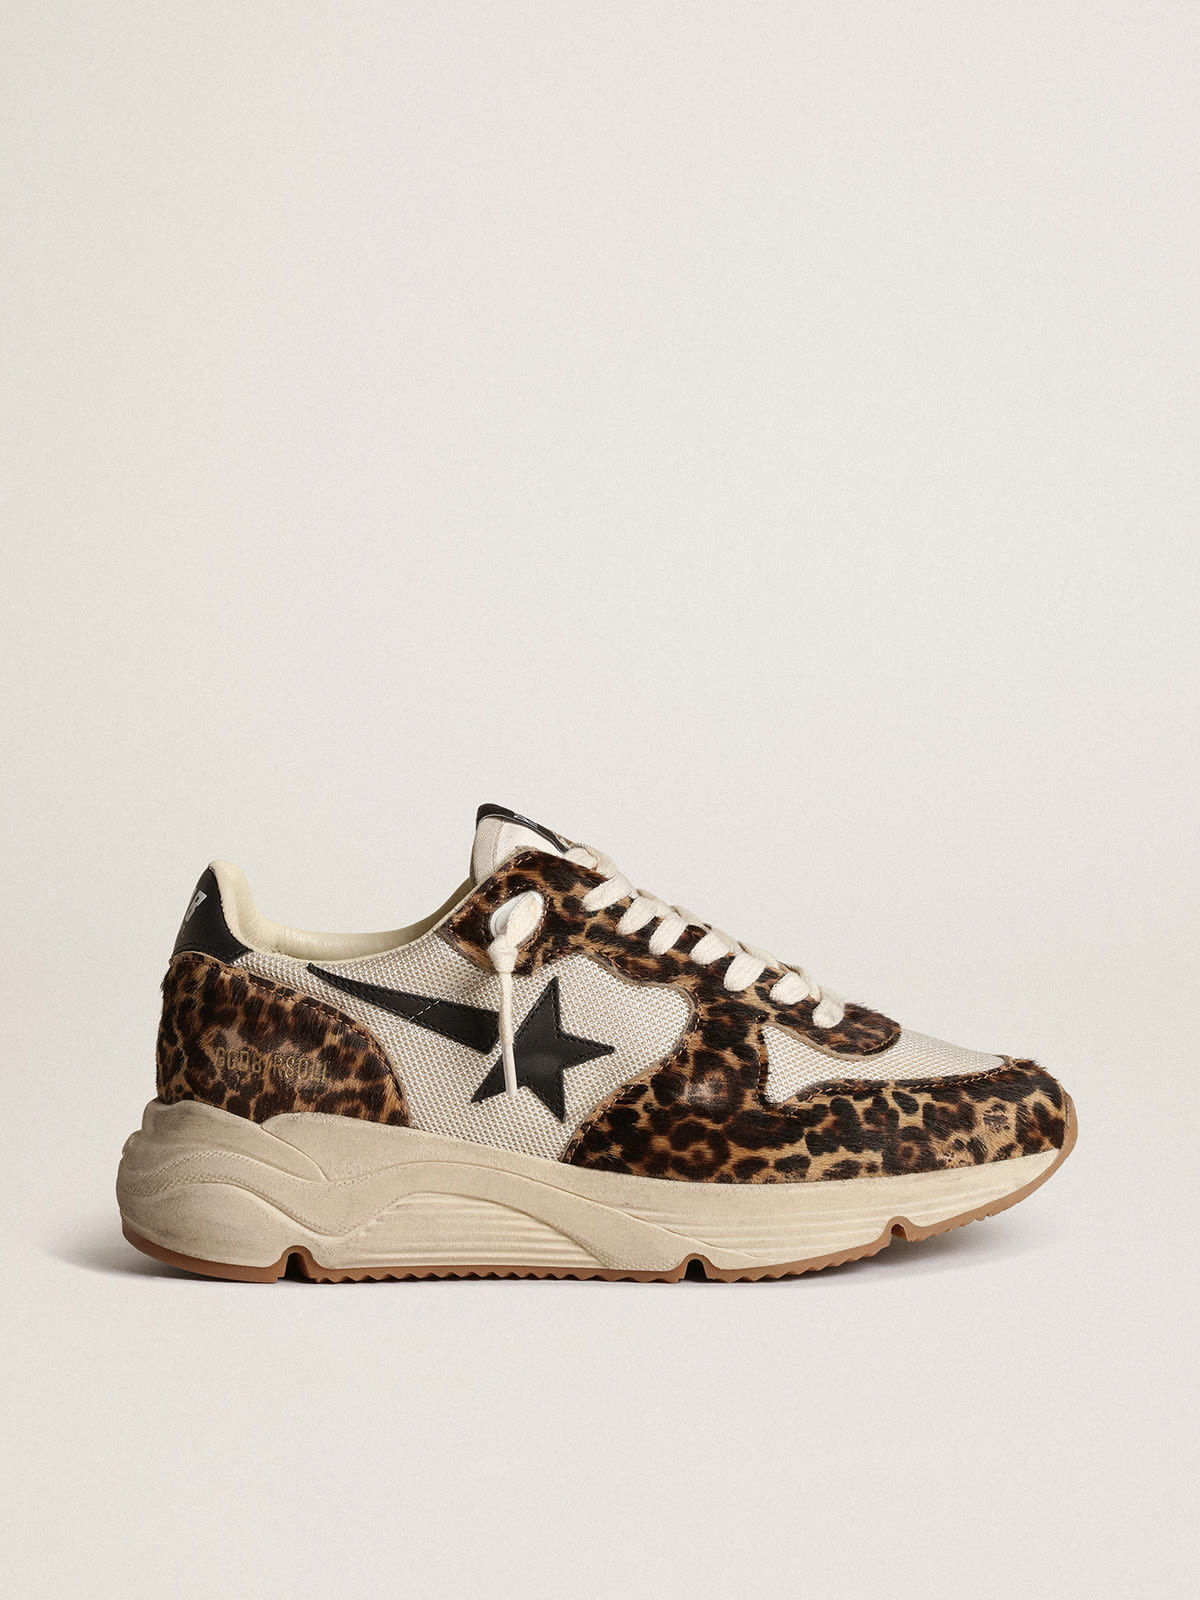 Golden Goose - Running Sole sneakers in cream-colored mesh with leopard-print pony skin inserts and black leather star in 